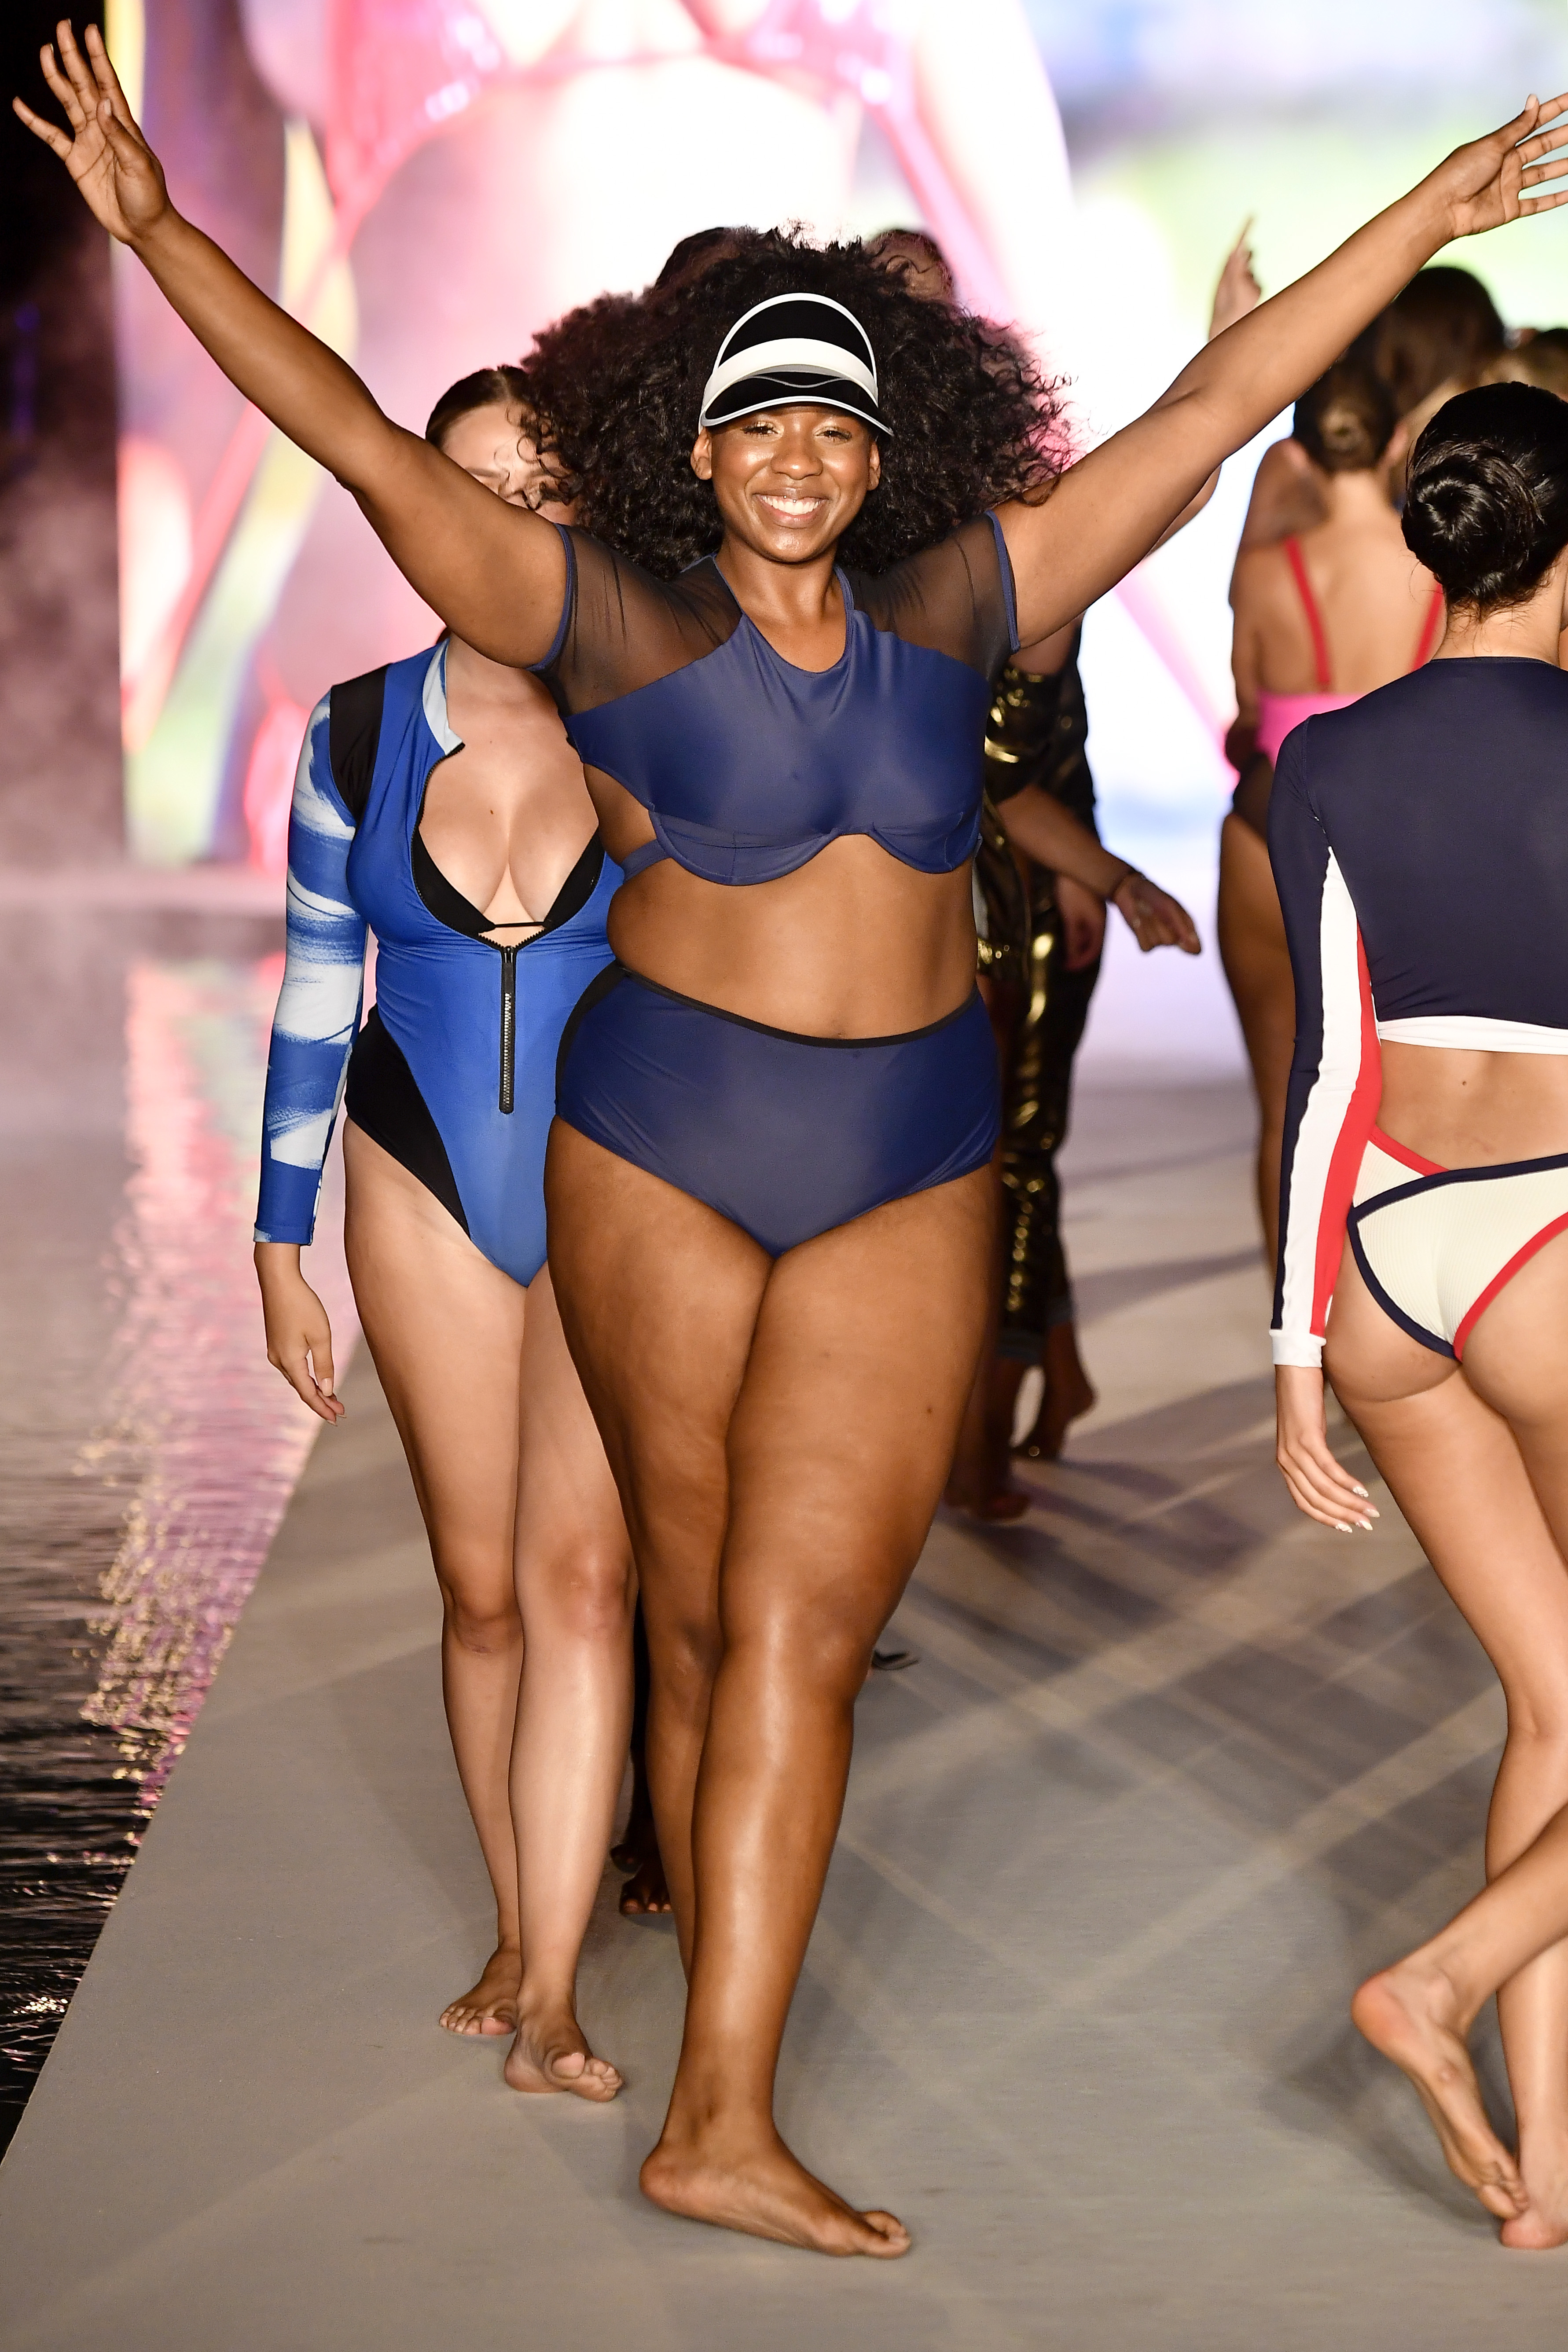 MIAMI, FL - JULY 15: Models walk the runway for the 2018 Sports Illustrated Swimsuit show at PARAISO during Miami Swim Week at The W Hotel South Beach on July 15, 2018 in Miami, Florida. (Photo by Frazer Harrison/Getty Images for Sports Illustrated)